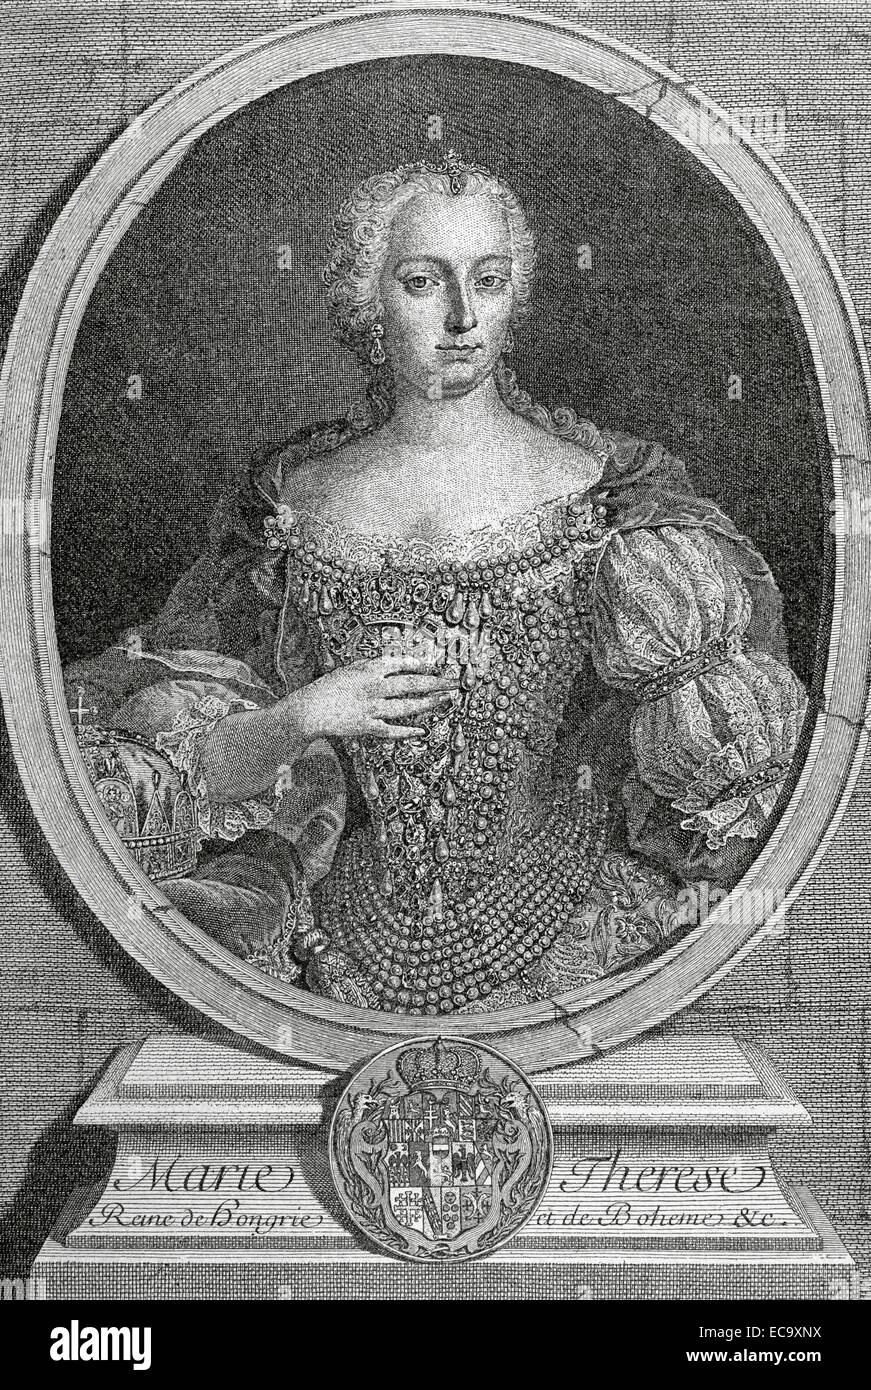 Maria Theresa (1717-1780), Archduchess of Austria, Queen of Hungary and Bohemia. Portrait. Engraving by de Petit, 1743. La Historia Universal, 1885. Stock Photo